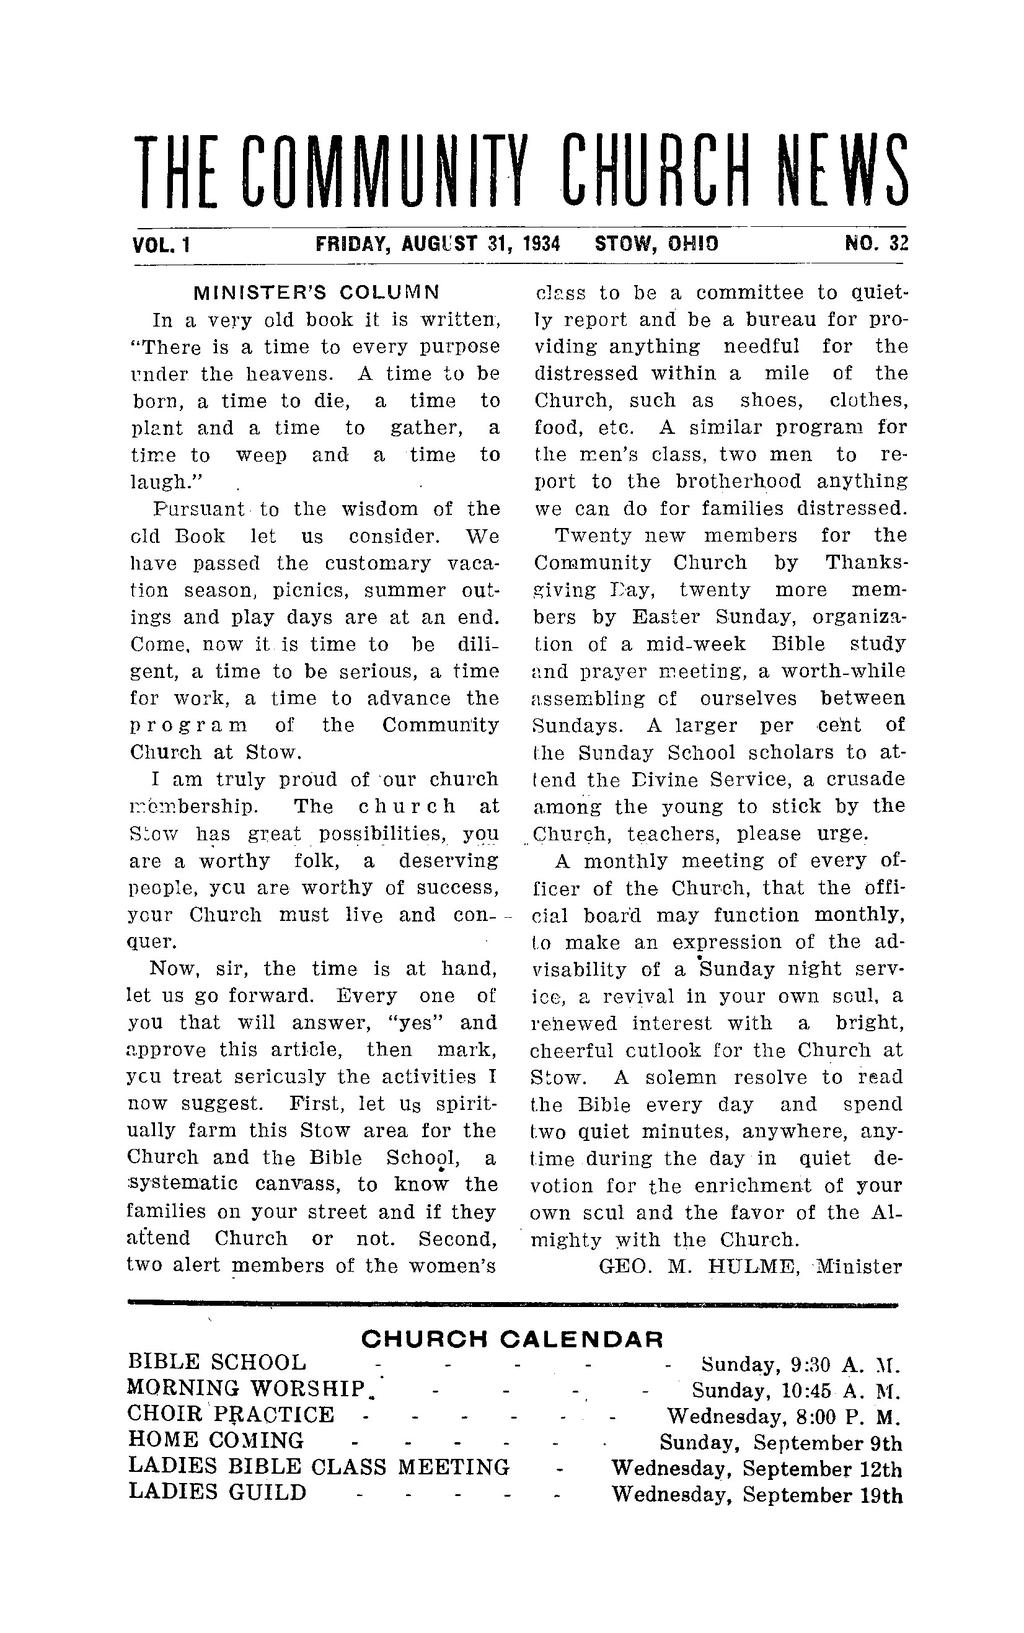 THE COMMUNITY CHURCH NEWS VOL. 1 FRIDAY, AUGUST 31, 1934 STOW, OHIO NO. 32 MINISTER'S COLUMN In a very old book it is written, "There is a time to every purpose under the heavens.